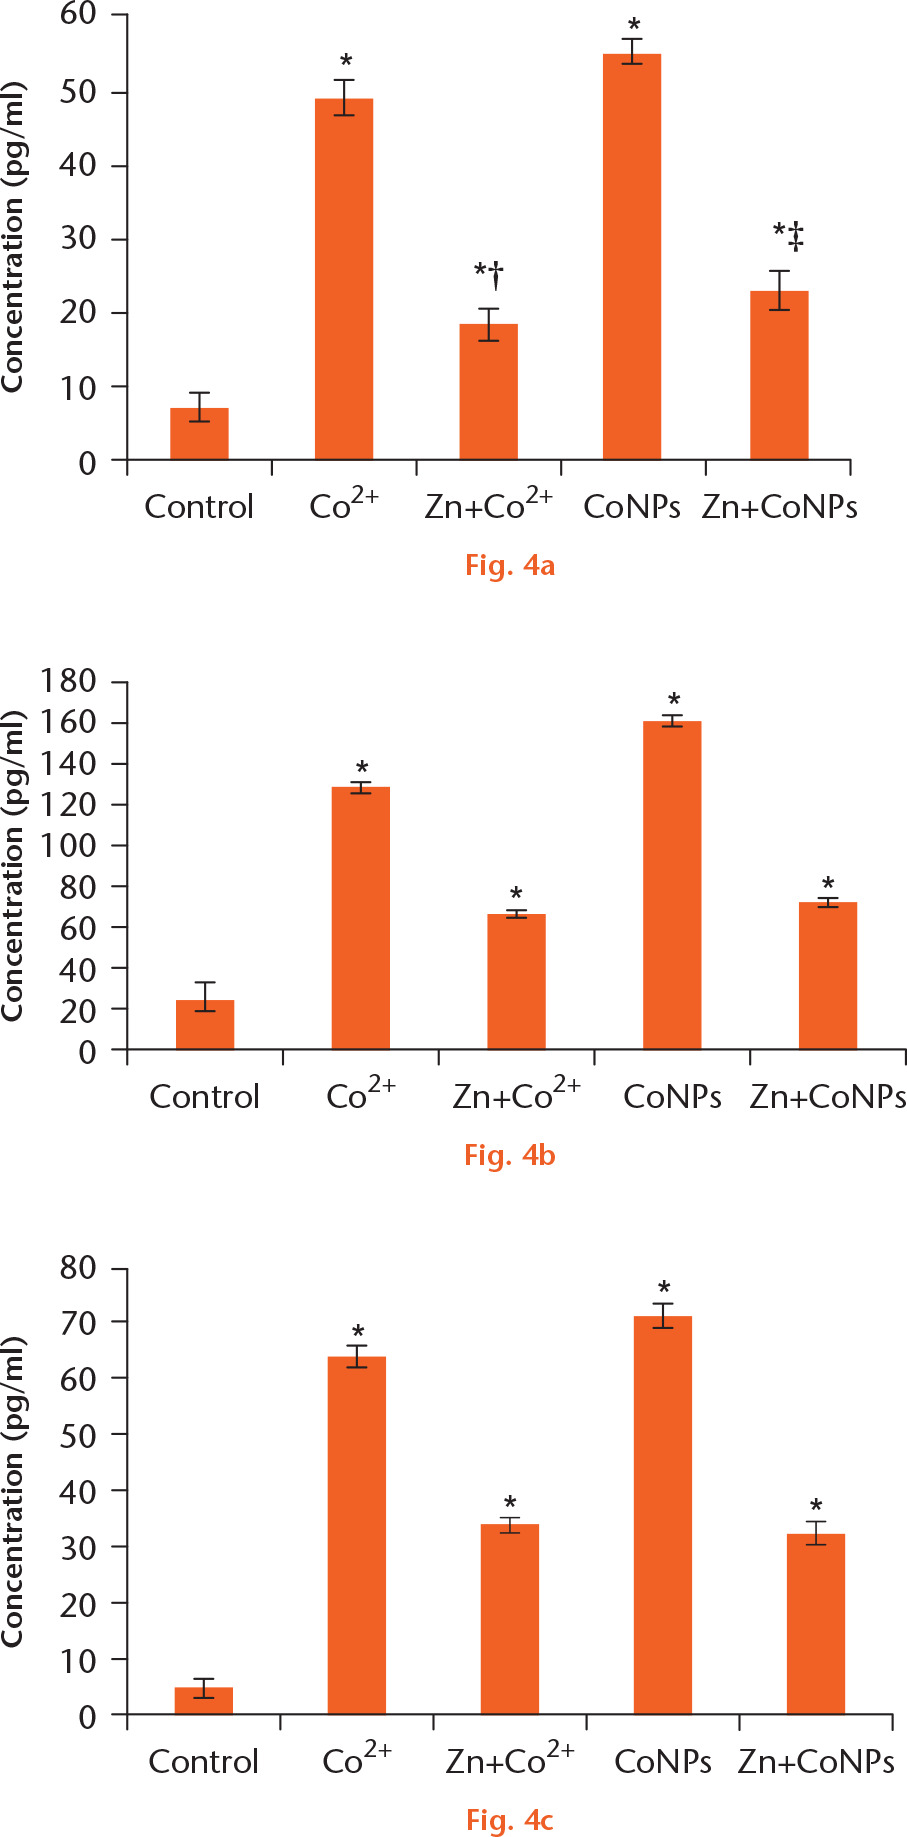  
            Effect of zinc ions (Zn2+) pretreatment on a) tumour necrosis factor-α (TNF-α), b) interleukin-6 (IL-6) and c) interleukin-1β (IL-1β) levels in Balb/3T3 cells treated with cobalt nanoparticles (CoNPs) and cobalt ions (Co2+). Balb/3T3 cells were pretreated with 50 μM Zn2+ for four hours, followed by treatment with 100 μM Co2+ and 50 μM CoNPs for 24 hours. Data were expressed as the mean ± standard deviation. *p < 0.05 compared with the control group. †p < 0.05 compared with the Co2+ treated group. ‡p < 0.05 compared with the CoNPs treated group.
          